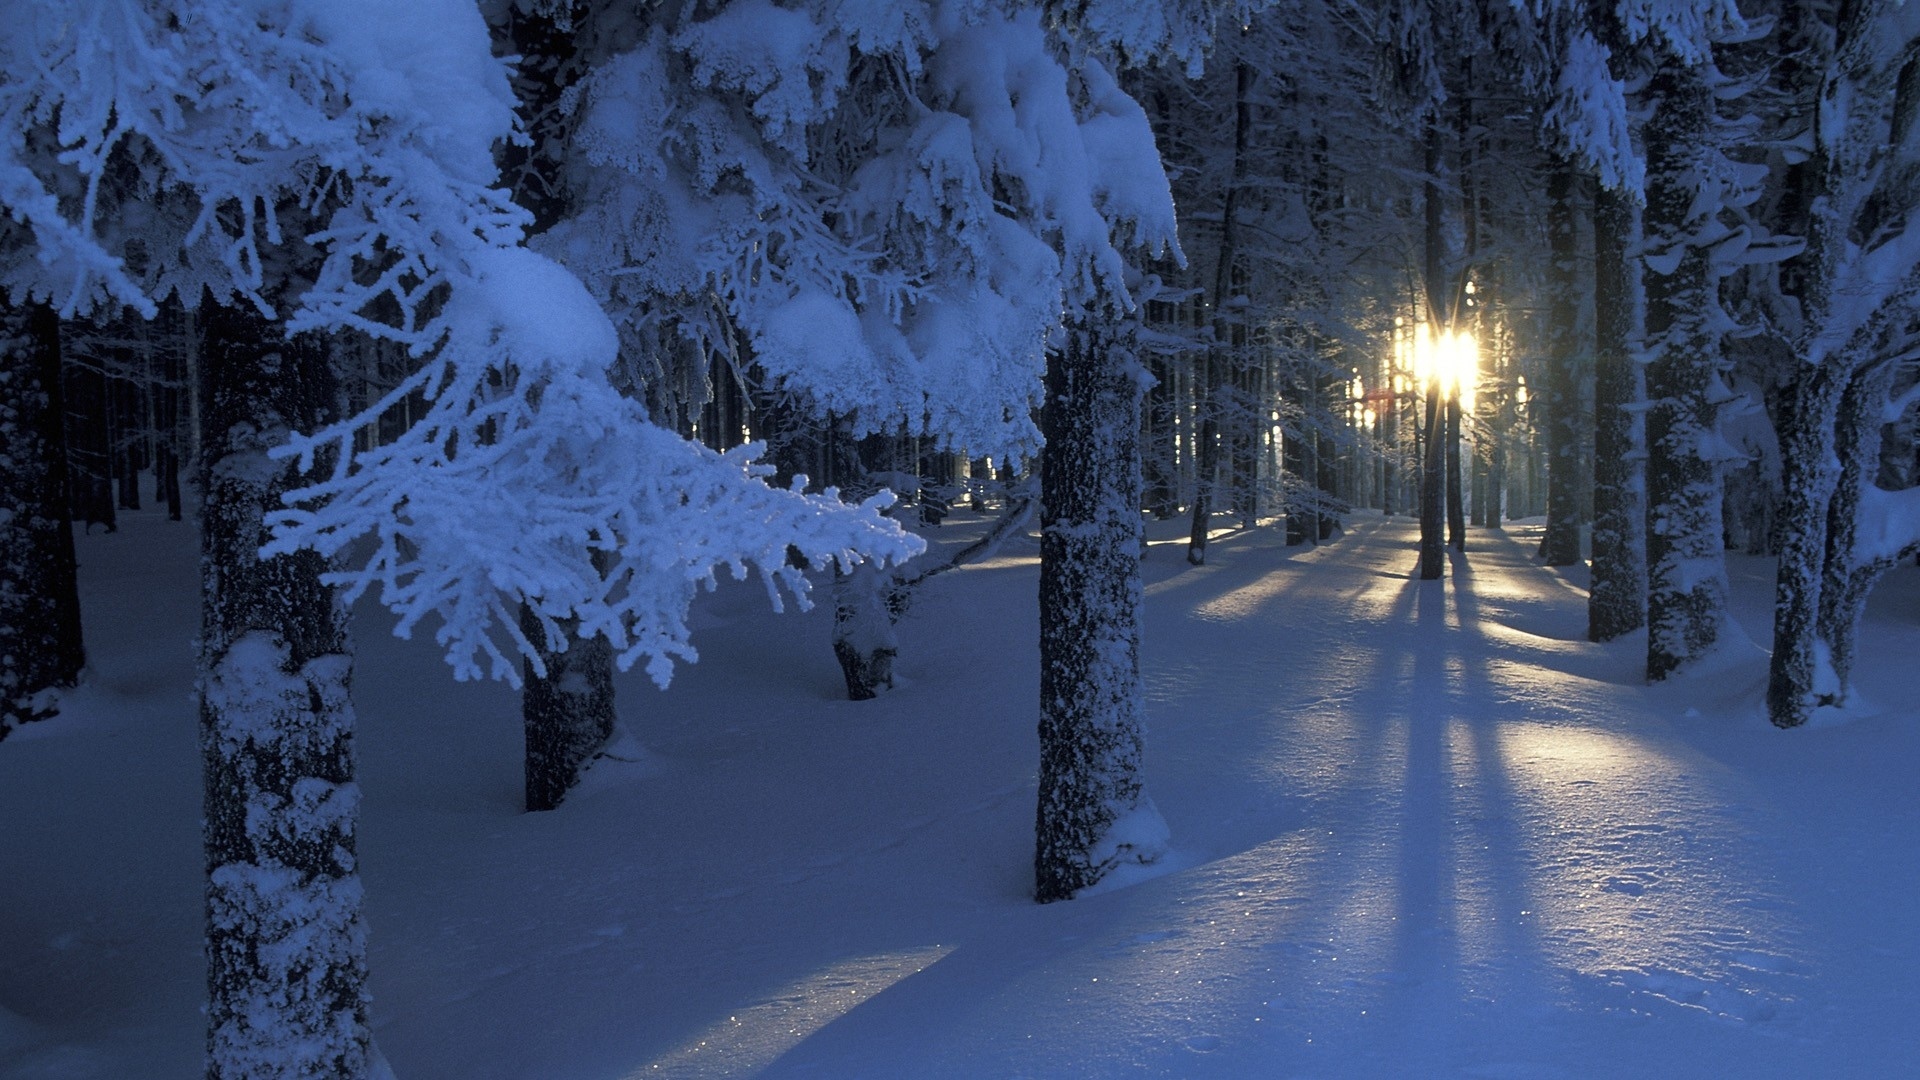 The sun is shining through the trees in the winter forest